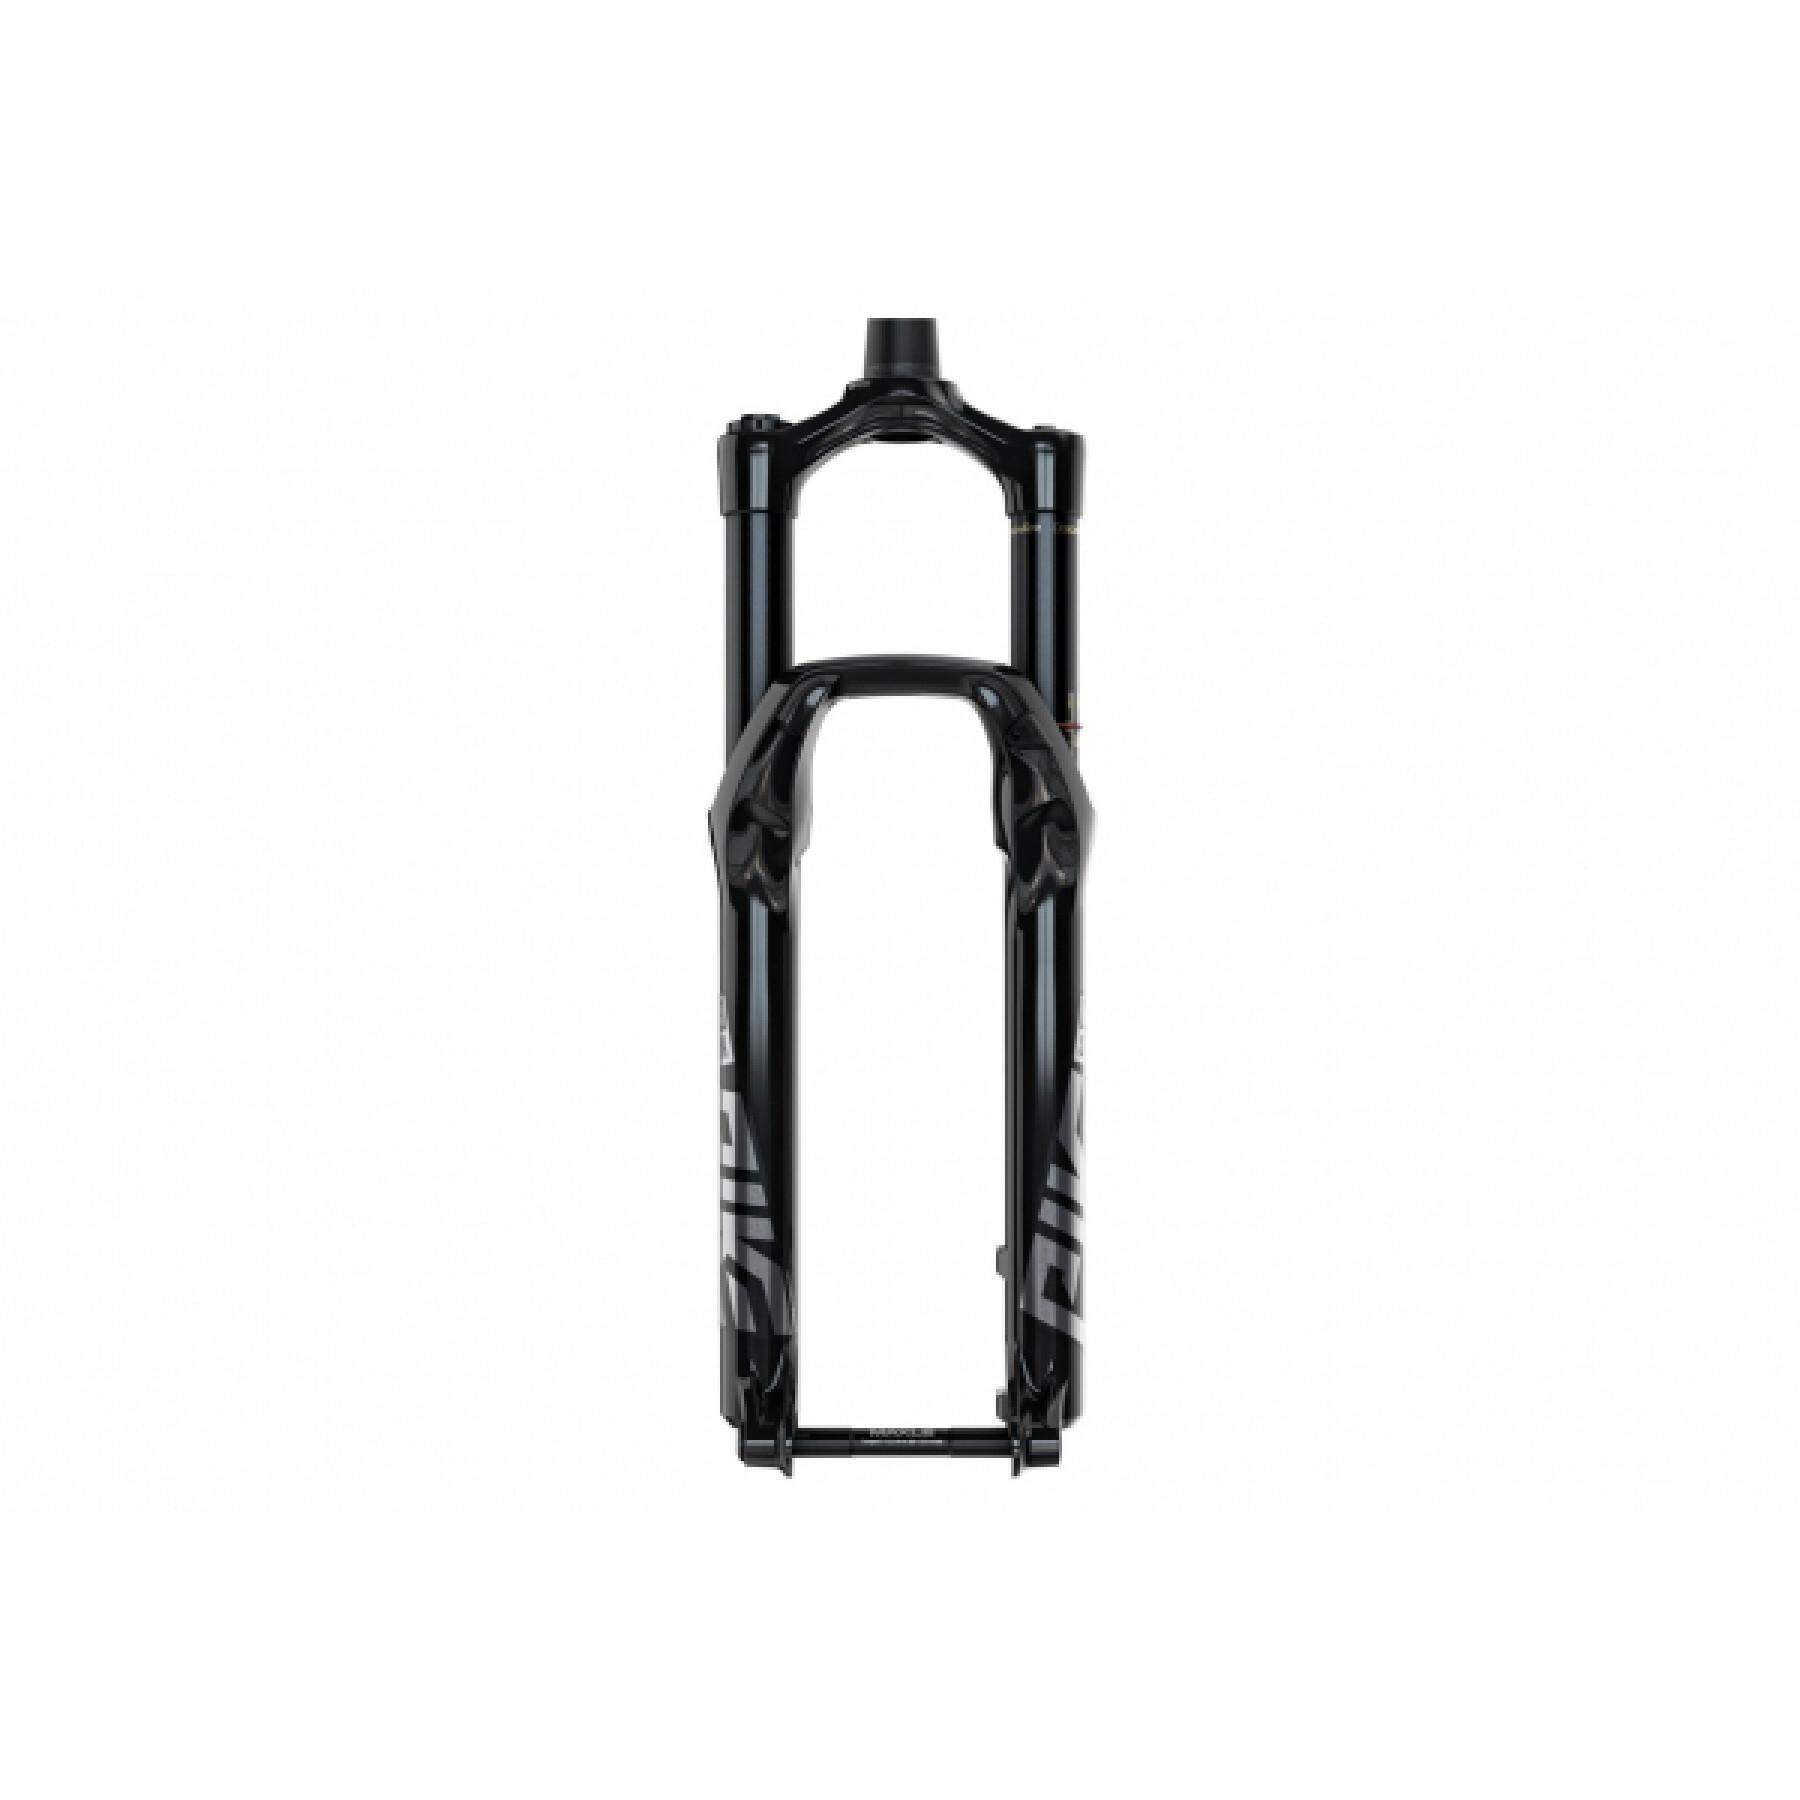 Forcella Rockshox Rs.Pike Ult.Chg 2.1 29 Boost 130 42Of.Con.Deb.